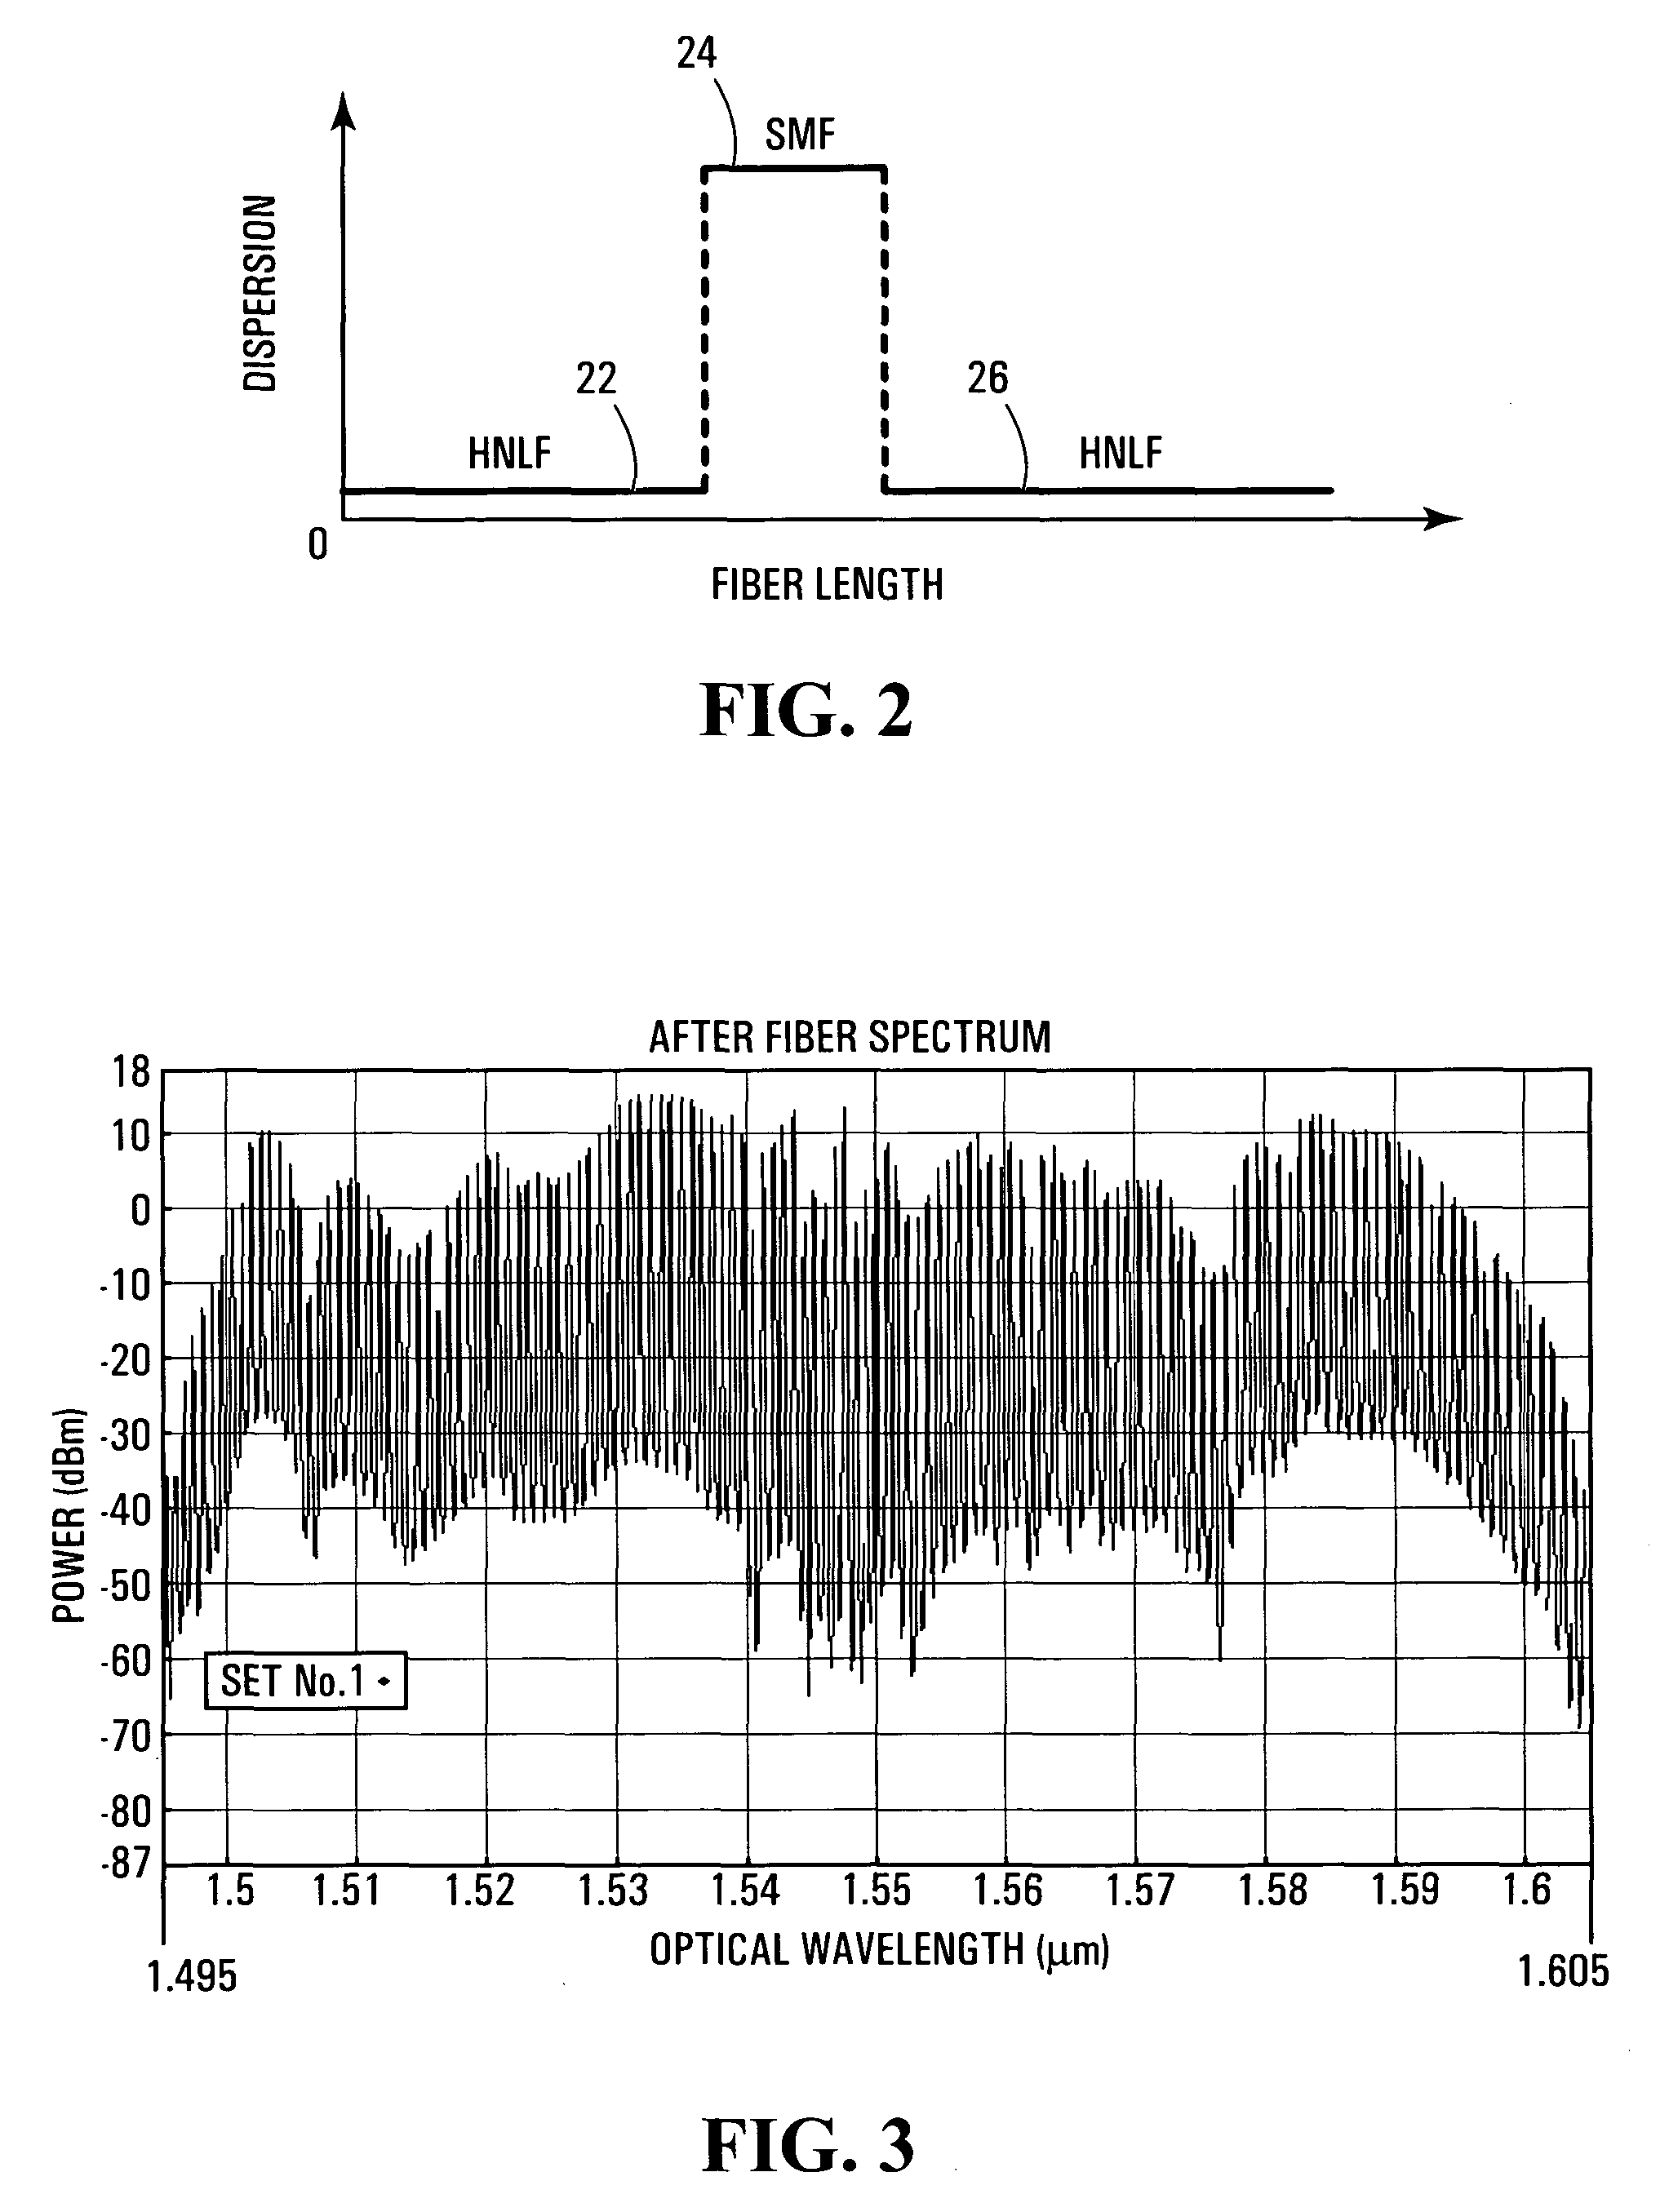 System and method for generating multi-wavelength laser source using highly nonlinear fiber